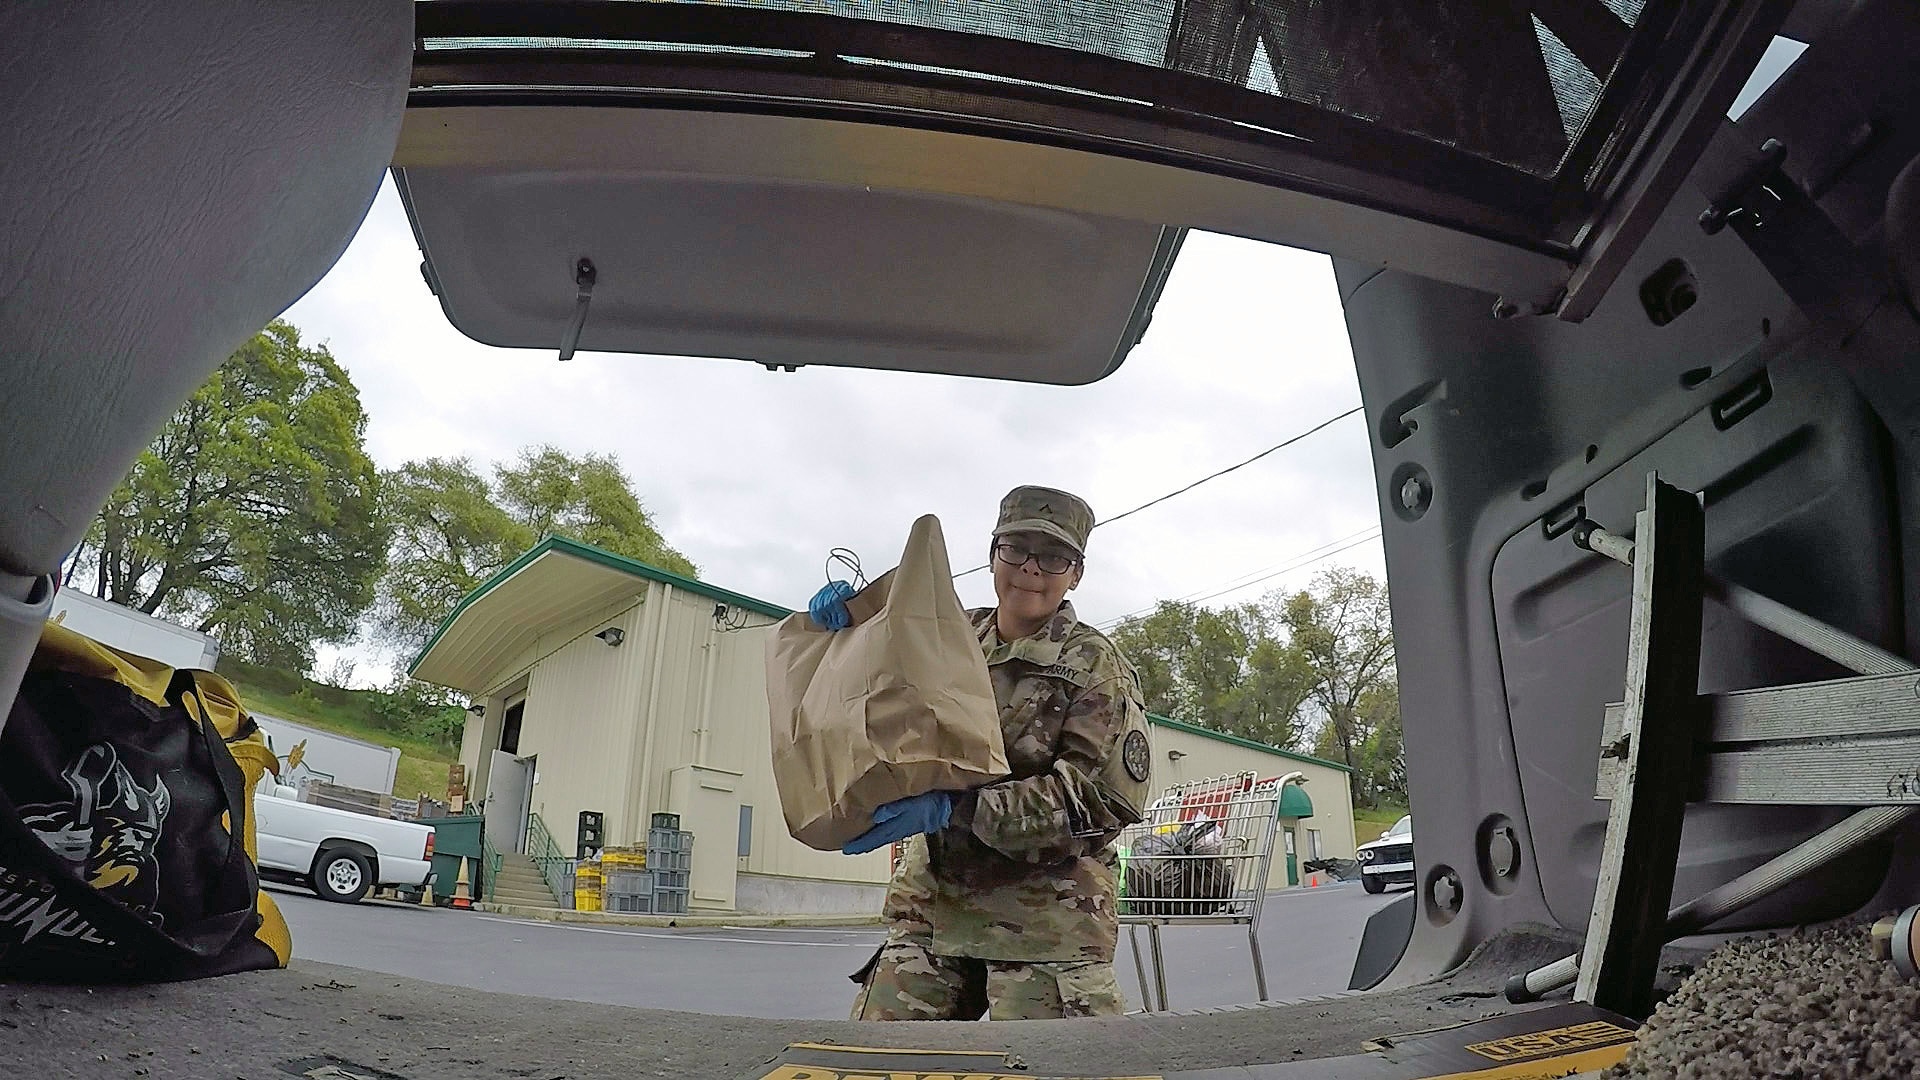 A member of the California Army National Guard assigned to Joint Task Force 115 loads food into a vehicle at the Interfaith Food Bank in Amador County, California, March 23, 2020. As of June 10, the California National Guard surpassed 50 million meals packed and distributed at food banks throughout the state since operations began in March as part of Cal Guard’s humanitarian response to the coronavirus pandemic.